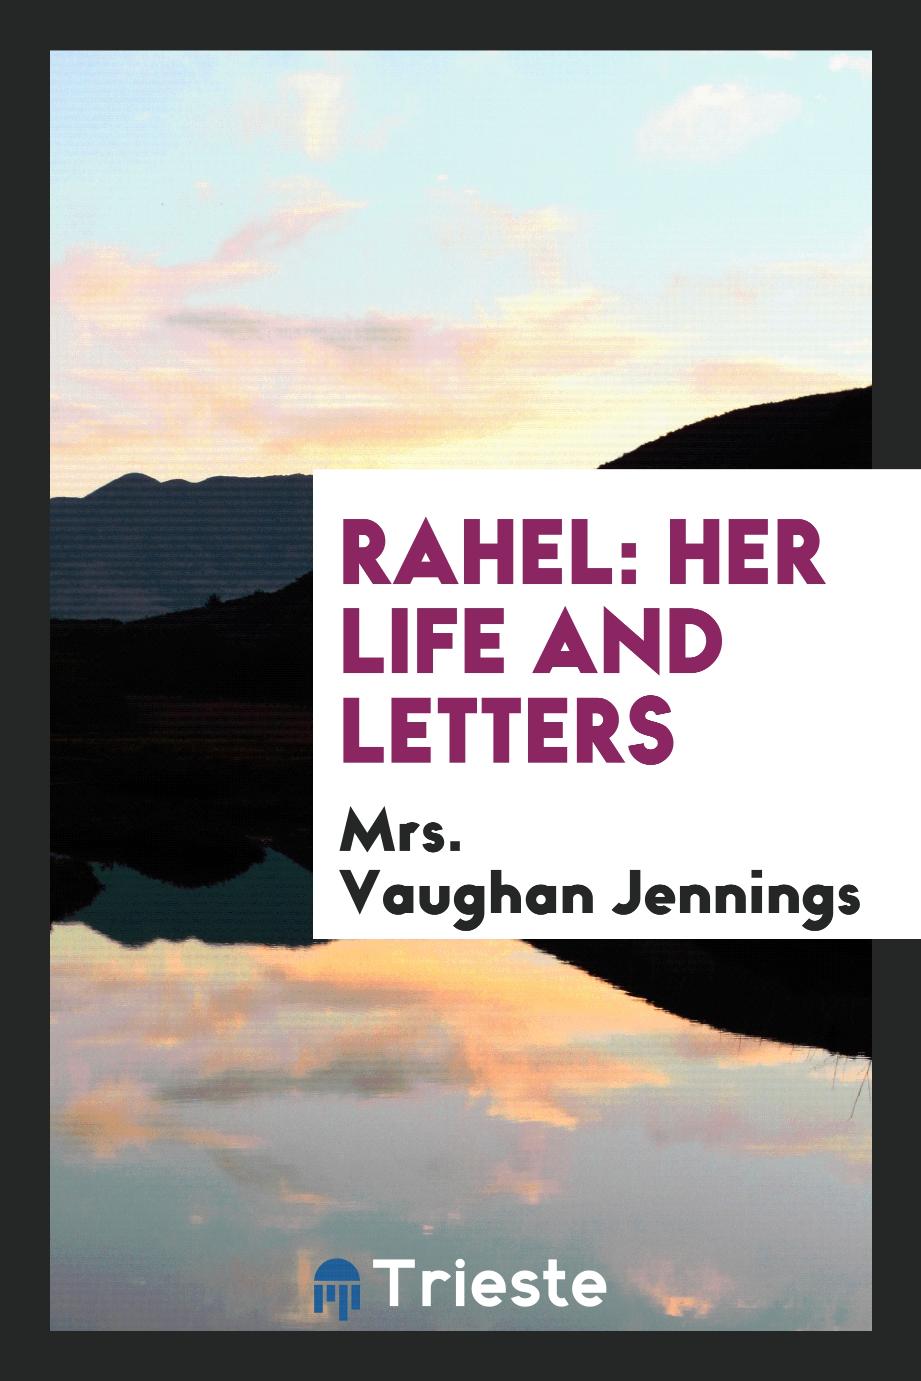 Rahel: her life and letters